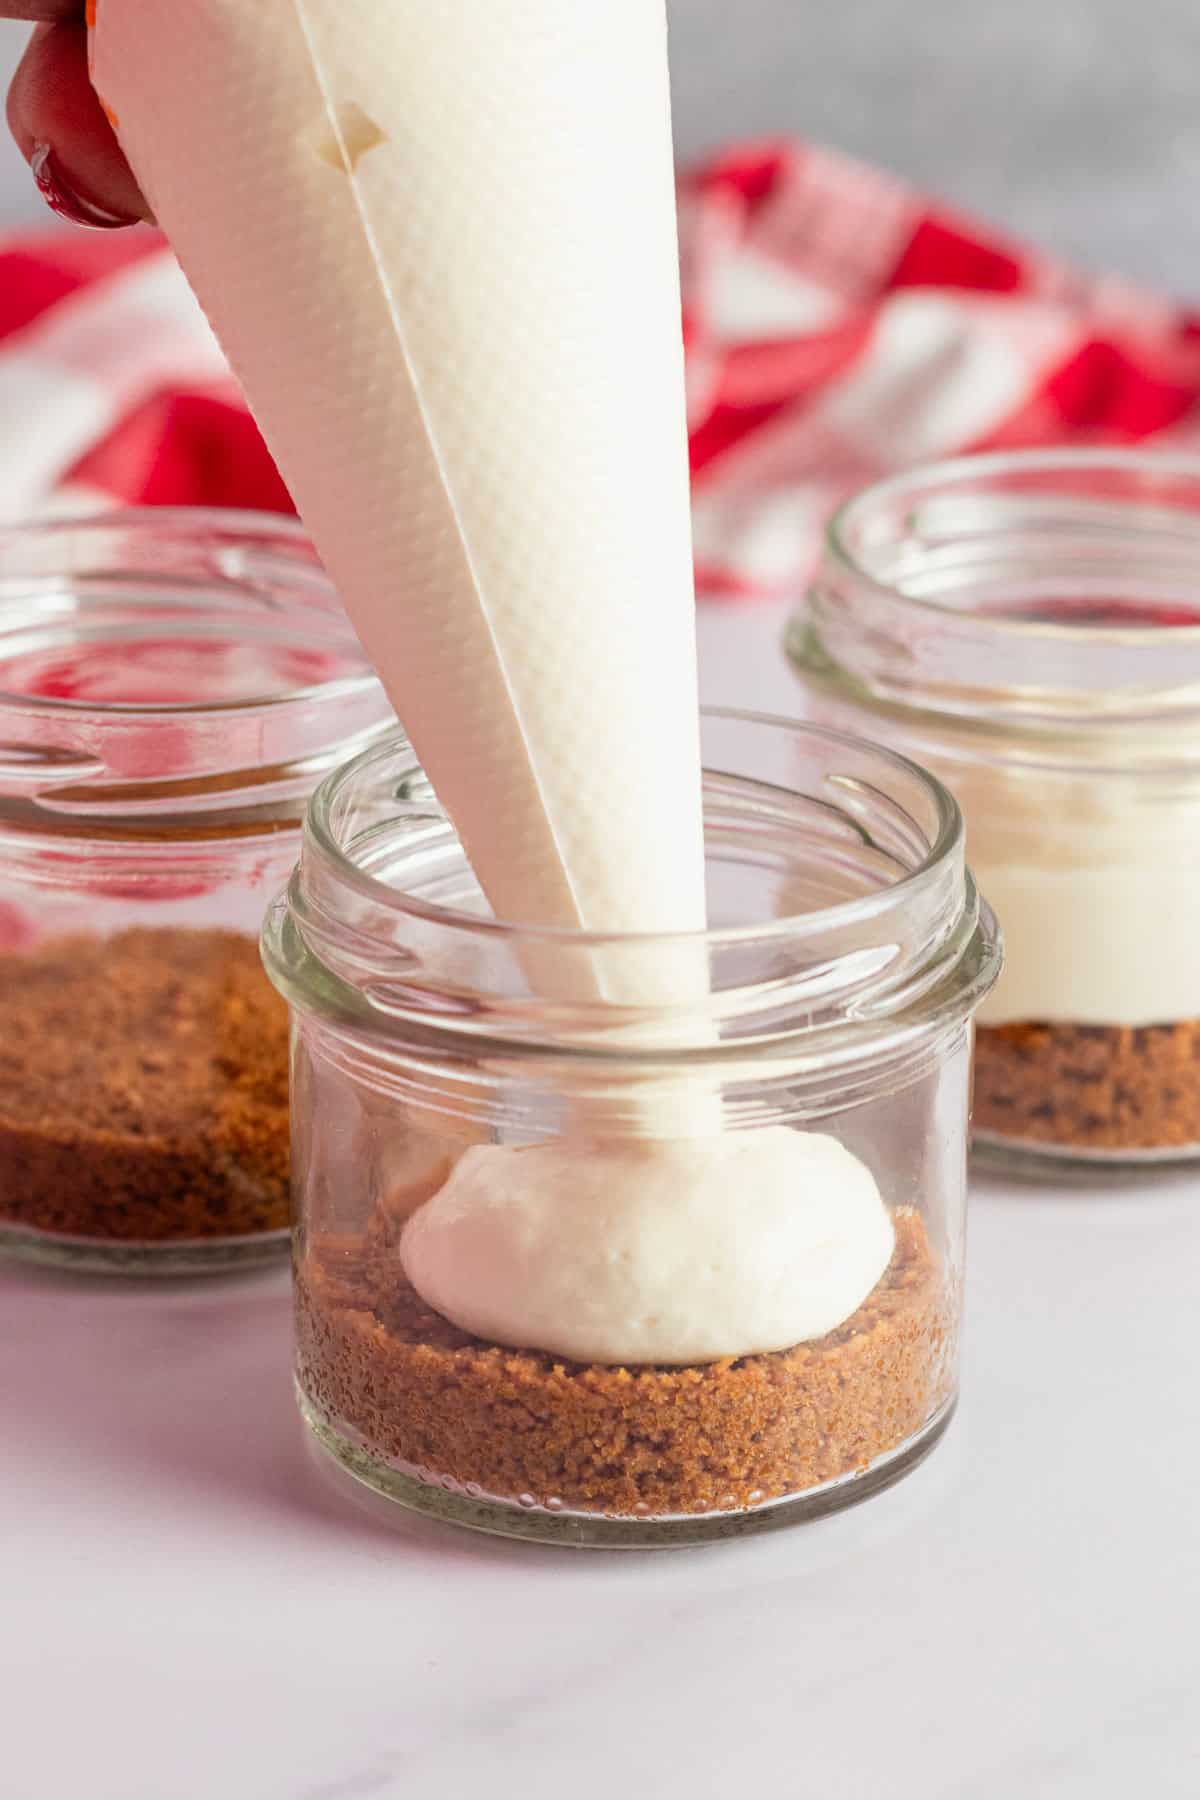 piping cream cheese layer into jars.